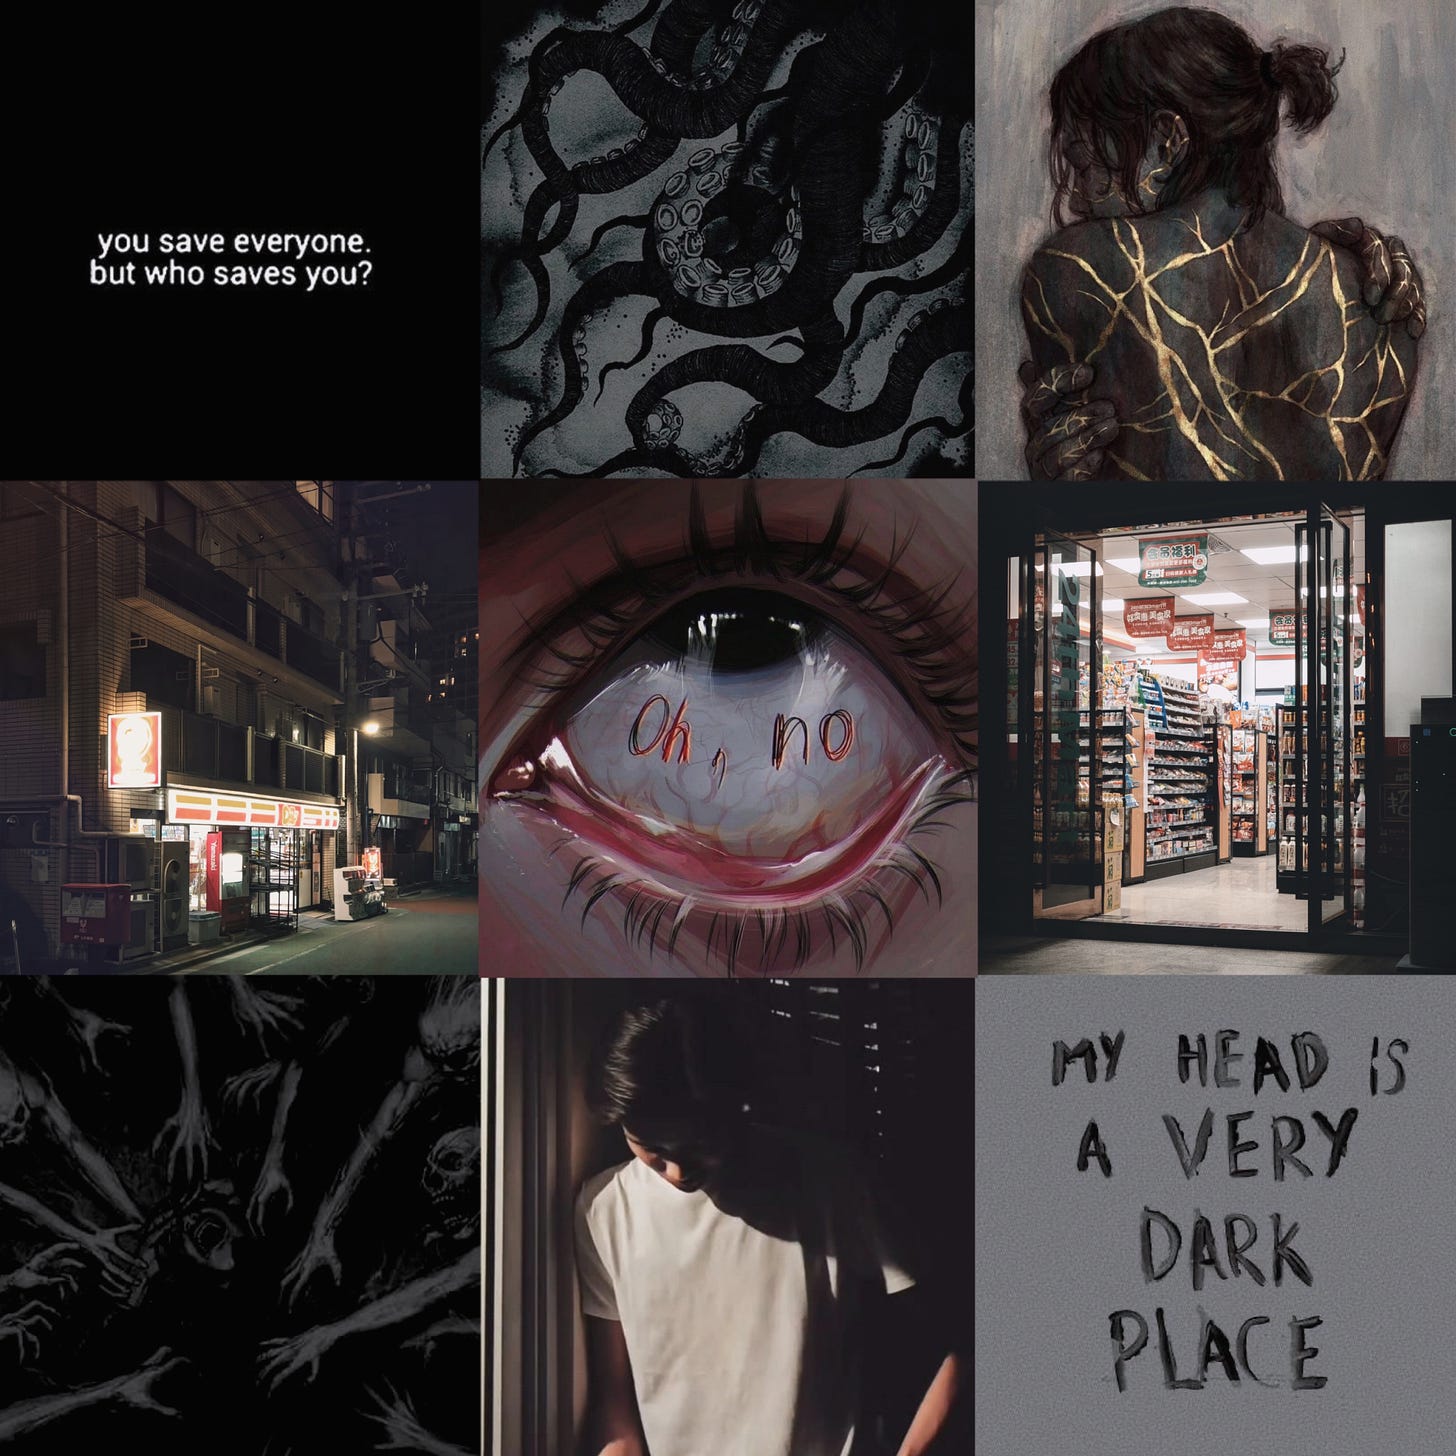 3 by 3 moodboard with gray tones, from top left to bottom right: 1. "you save everyone, but who saves you?" quote, 2. black illustrated tentacles, 3. illustration of someone's back with gold fracture lines webbing through it, 4. convenience store photographed at night, 5. illustration of a wide-open eye with "oh no" written in red on the sclera, 6. photograph of convenience store doorway taken at night, 7. dark picture of arms grasping toward someone in the center, 8. East Asian boy with his head down, wearing a light gray shirt, shrouded in shadows, 9. painted words "my head is a very dark place" on a gray background.